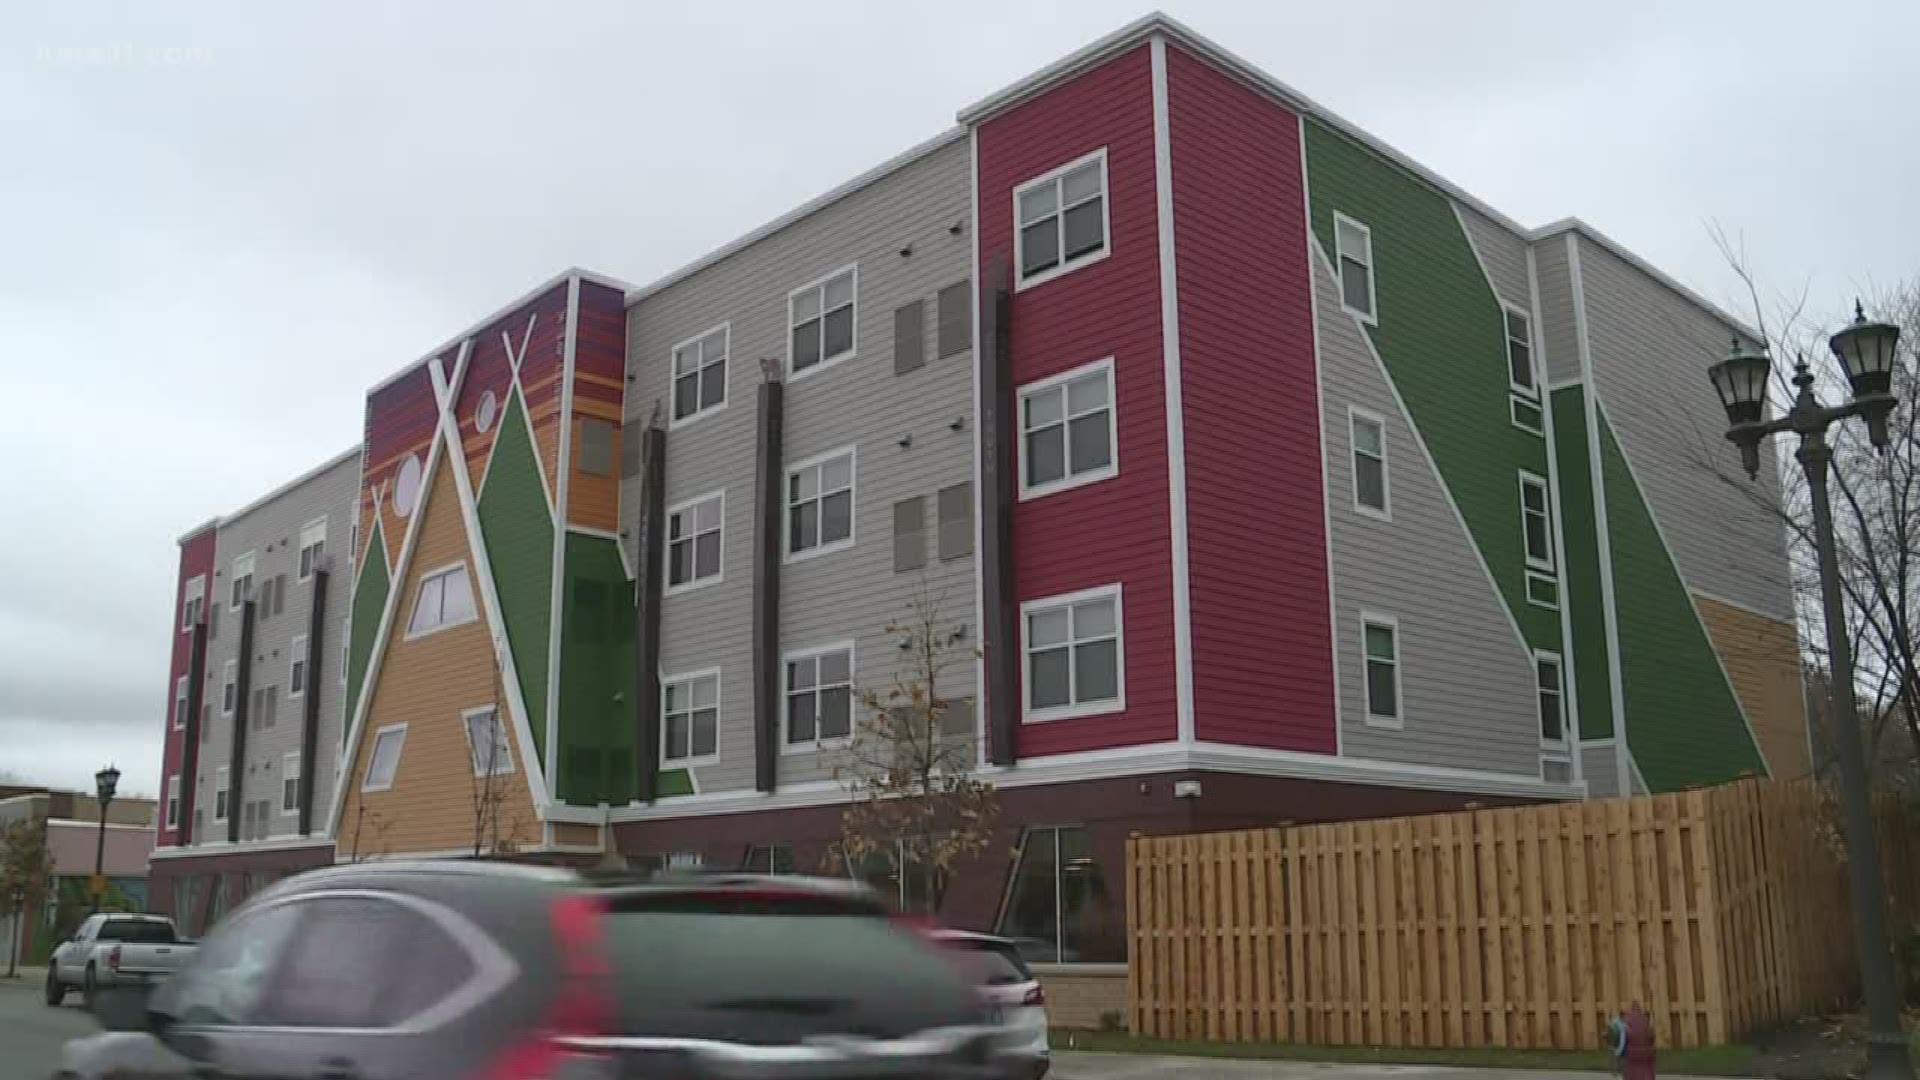 Some good news when it comes to affordable housing in Minnesota, the federal government announced five million dollars in housing assistance.